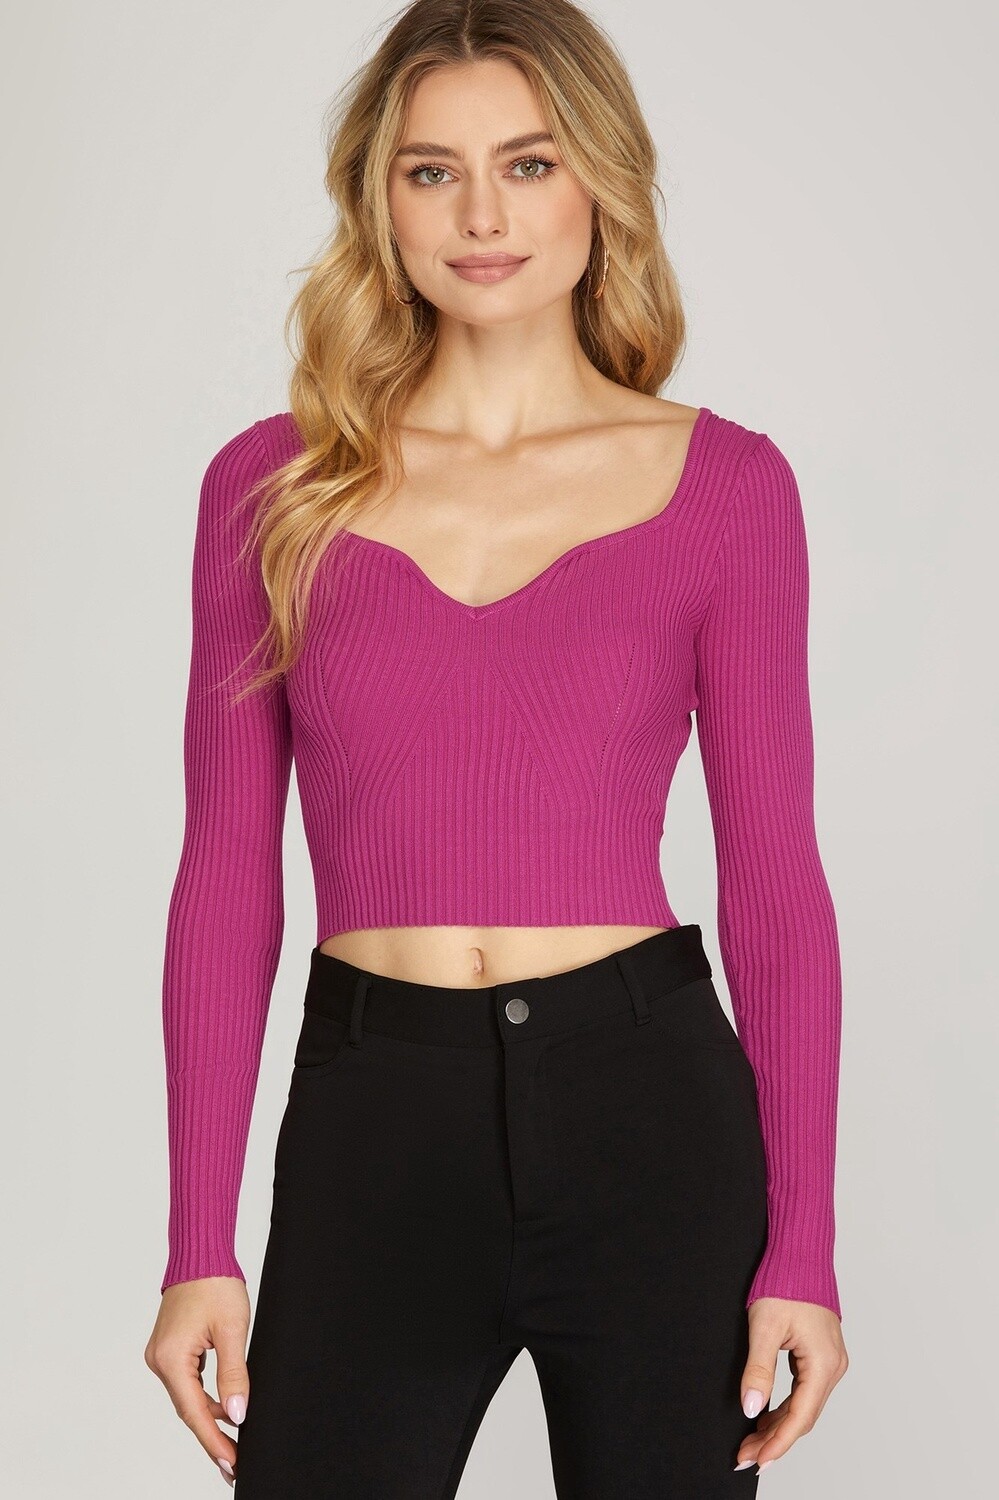 Sweetheart Ribbed Top, Size: Small, Color: Black